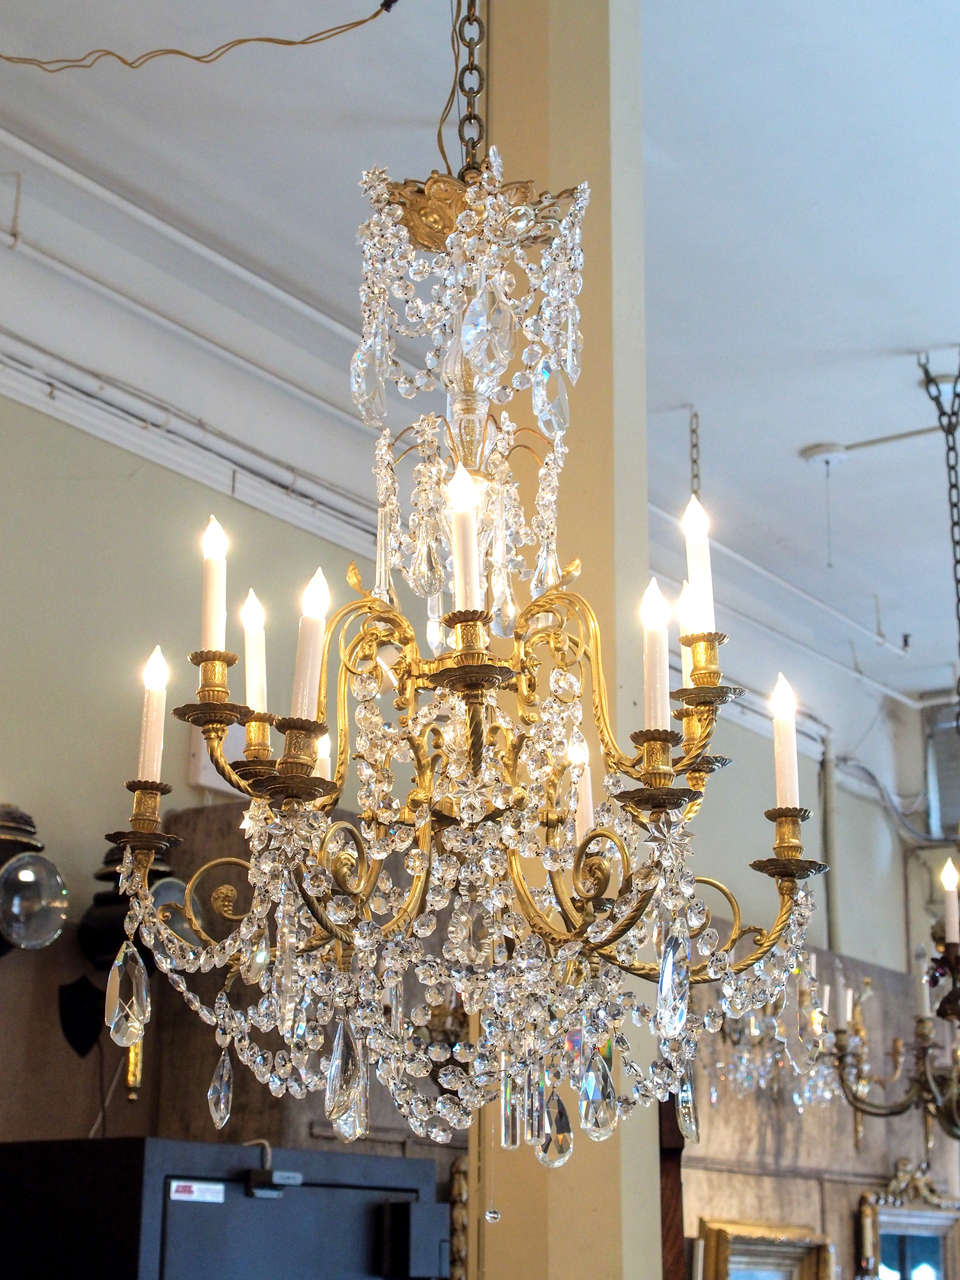 Antique French crystal and bronze Baccarat chandelier, circa 1890-1900. Richly draped.